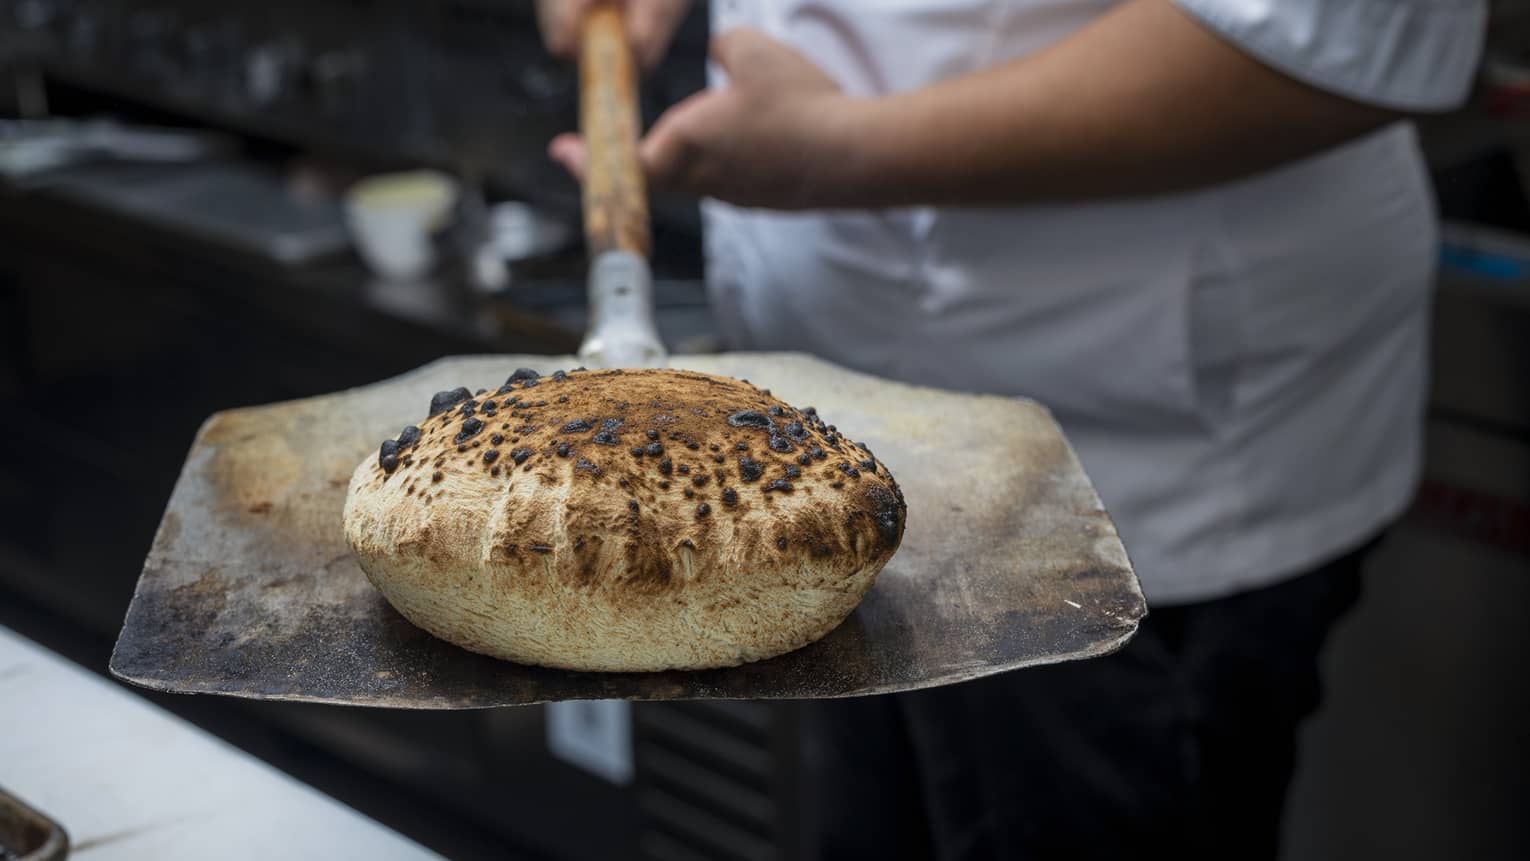 A chef wearing a white chef's jacket holds a fresh-baked loaf of bread on a large peel